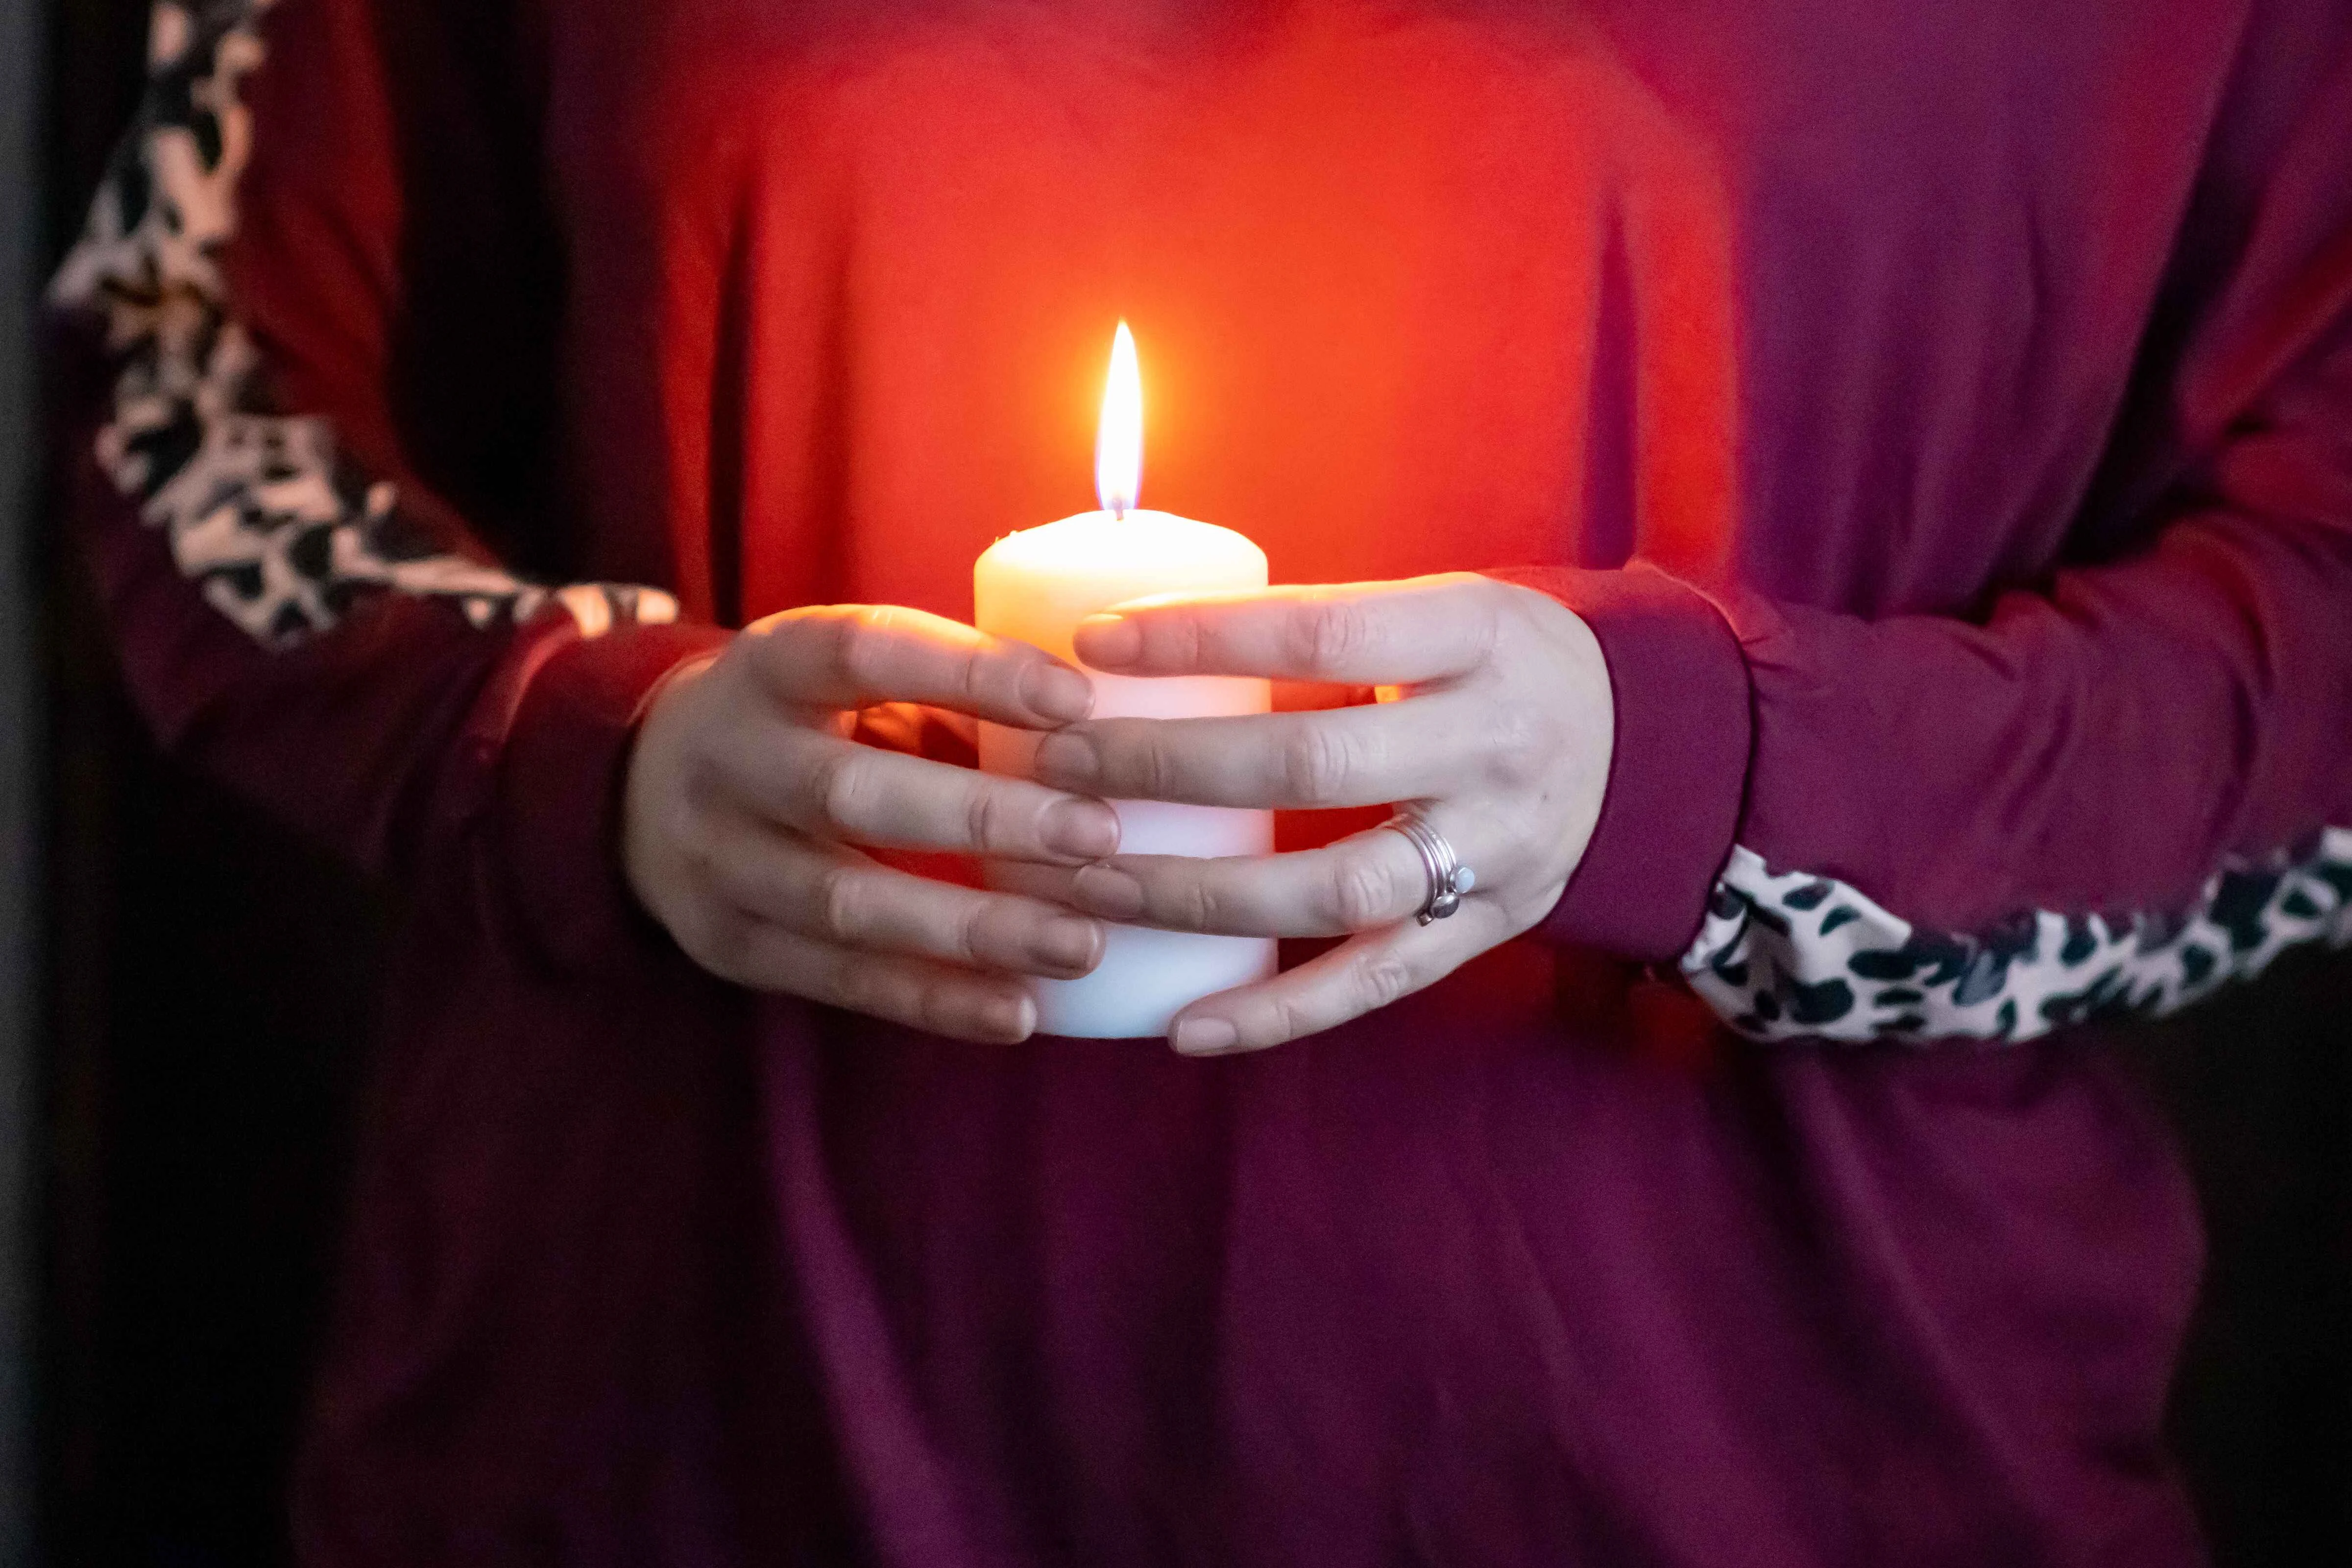 A close up of someone holding a candle while wearing deep red loungewear with leopard print detailing